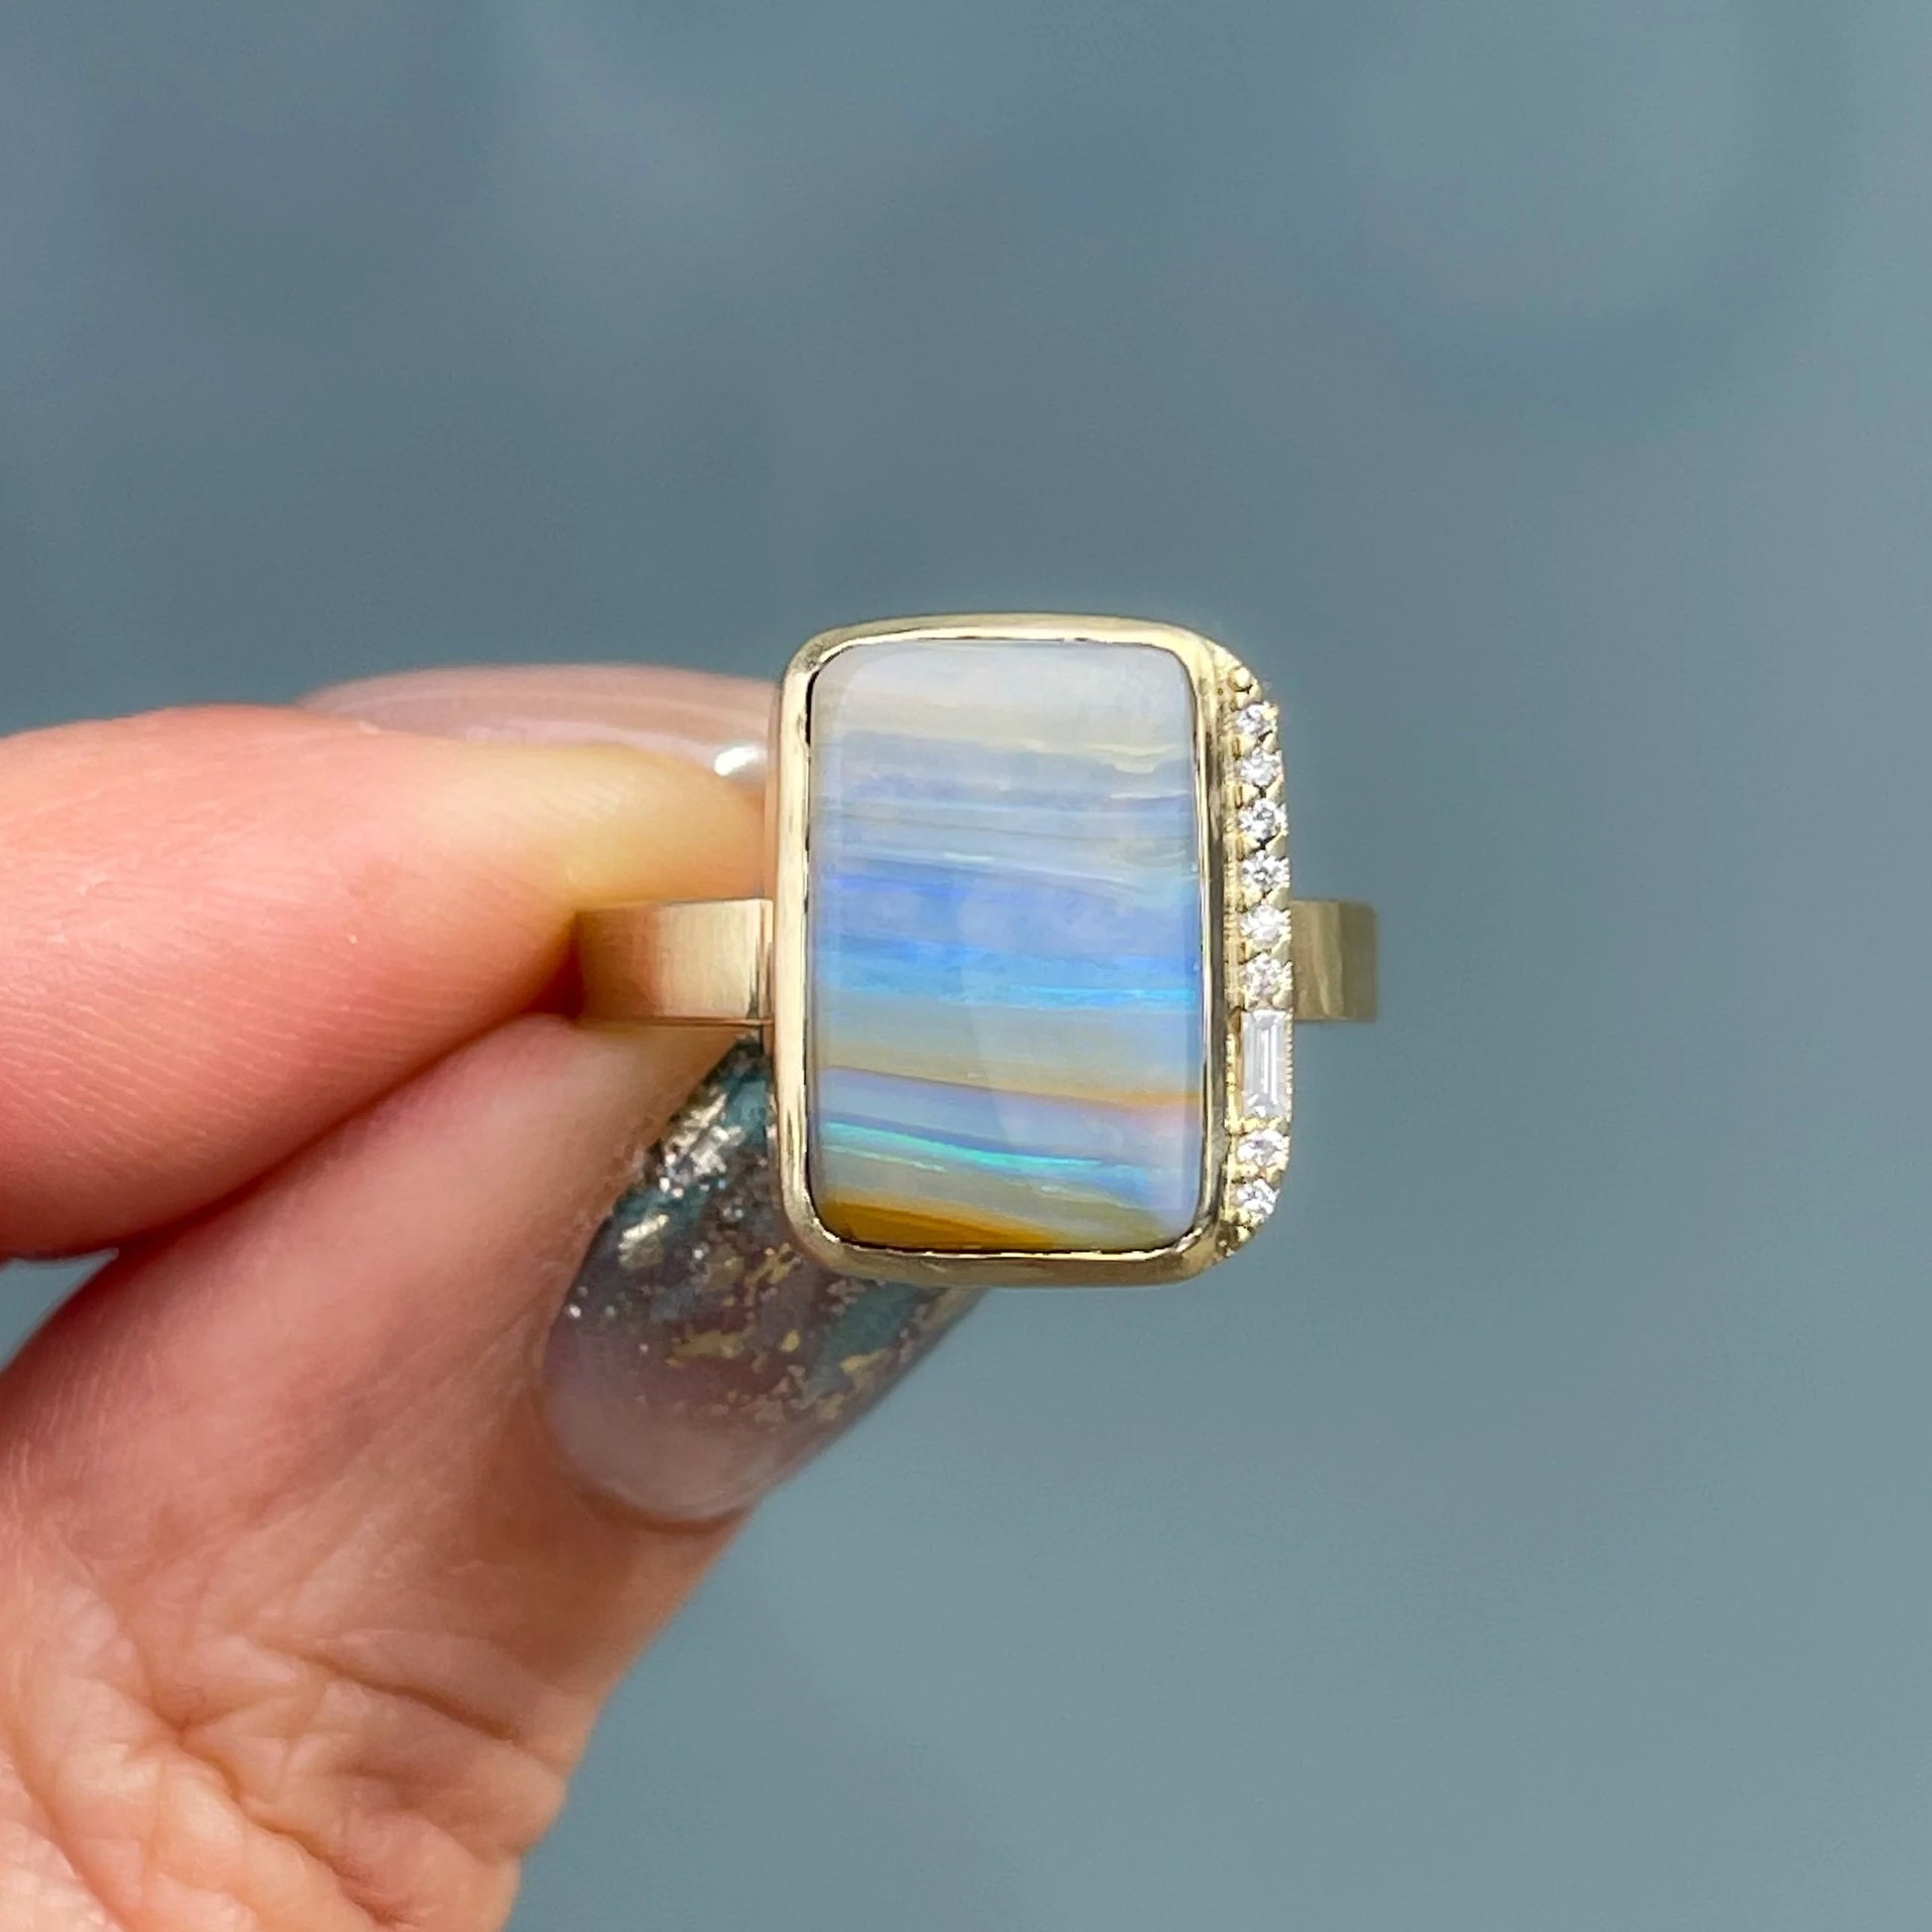 An Australian Opal Ring by NIXIN Jewelry with a Boulder Opal set in gold is held in front of a frosted glass backdrop.